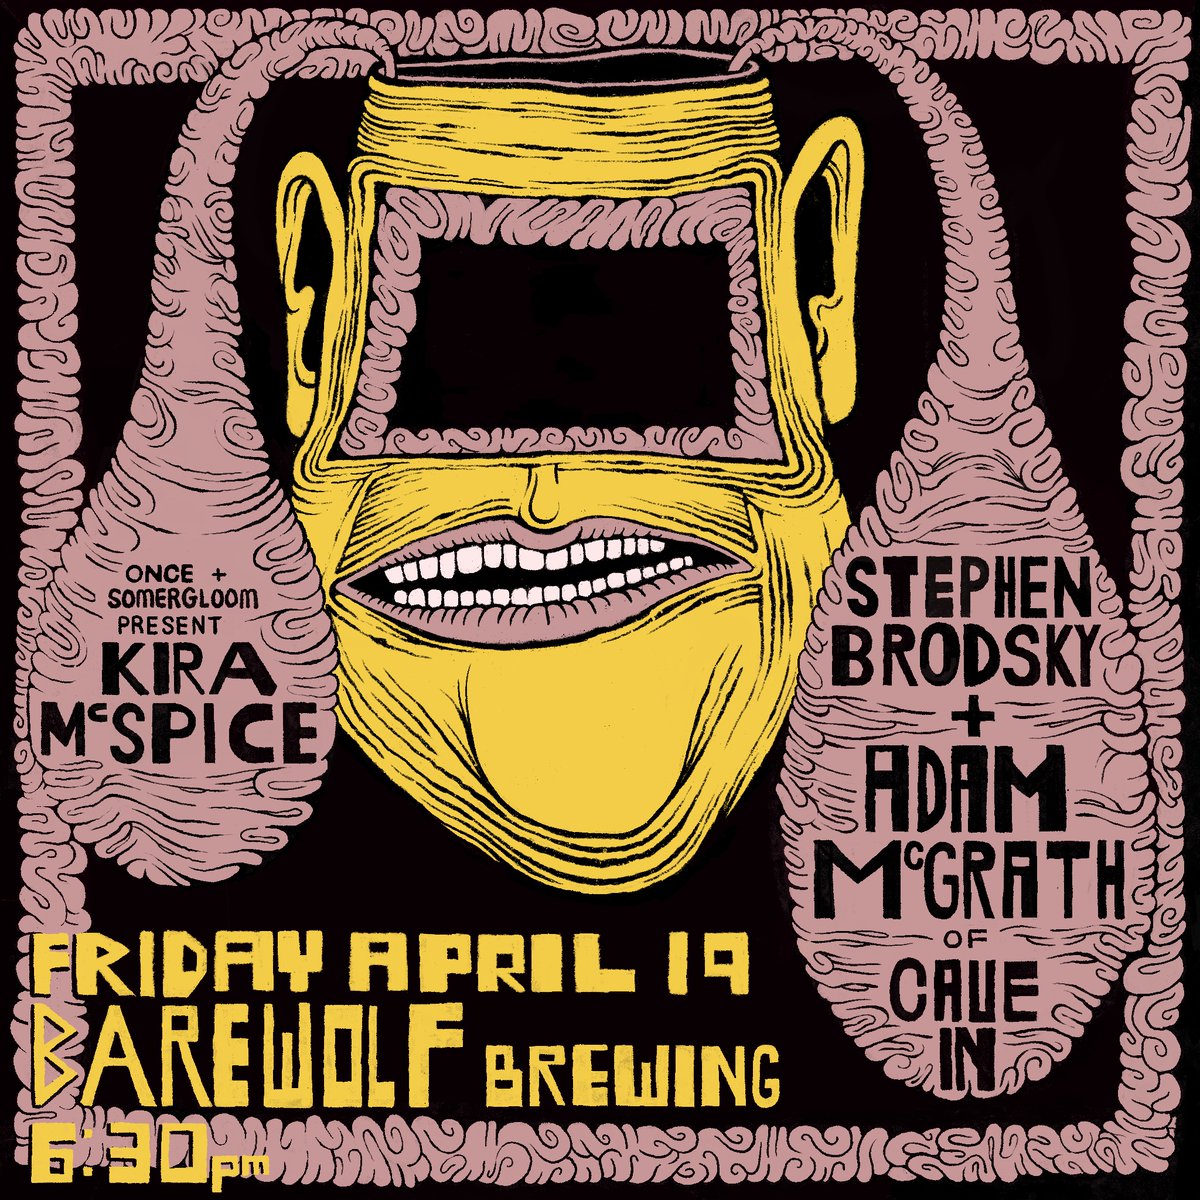 Looking for good times, beer, and singalongs to classic Cave In songs? 🖤 Join us at Barewolf Brewing April 19 for an acoustic set by Stephen Brodsky and Adam McGrath. Tickets oncesomerville.com #BarewolfBrewing #StephenBrodsky #AdamMcGrath #AcousticSet #CaveInMusic